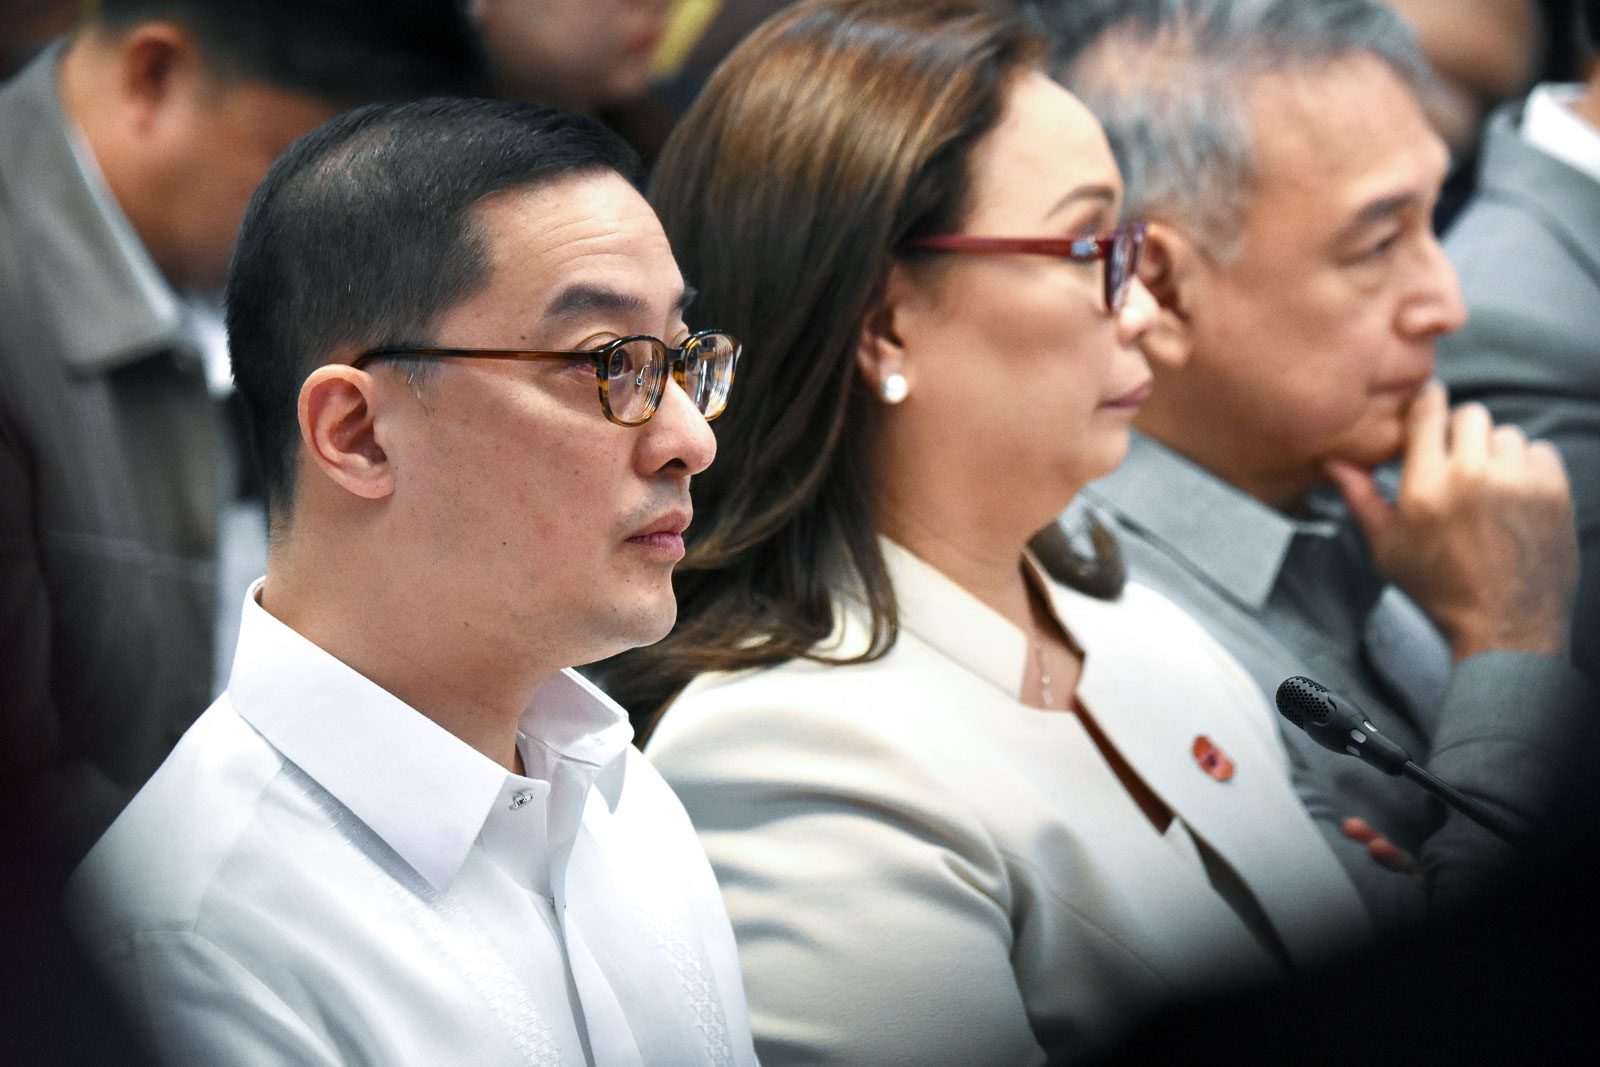 Senate hearing on ABS-CBN: No breach of laws, franchise terms